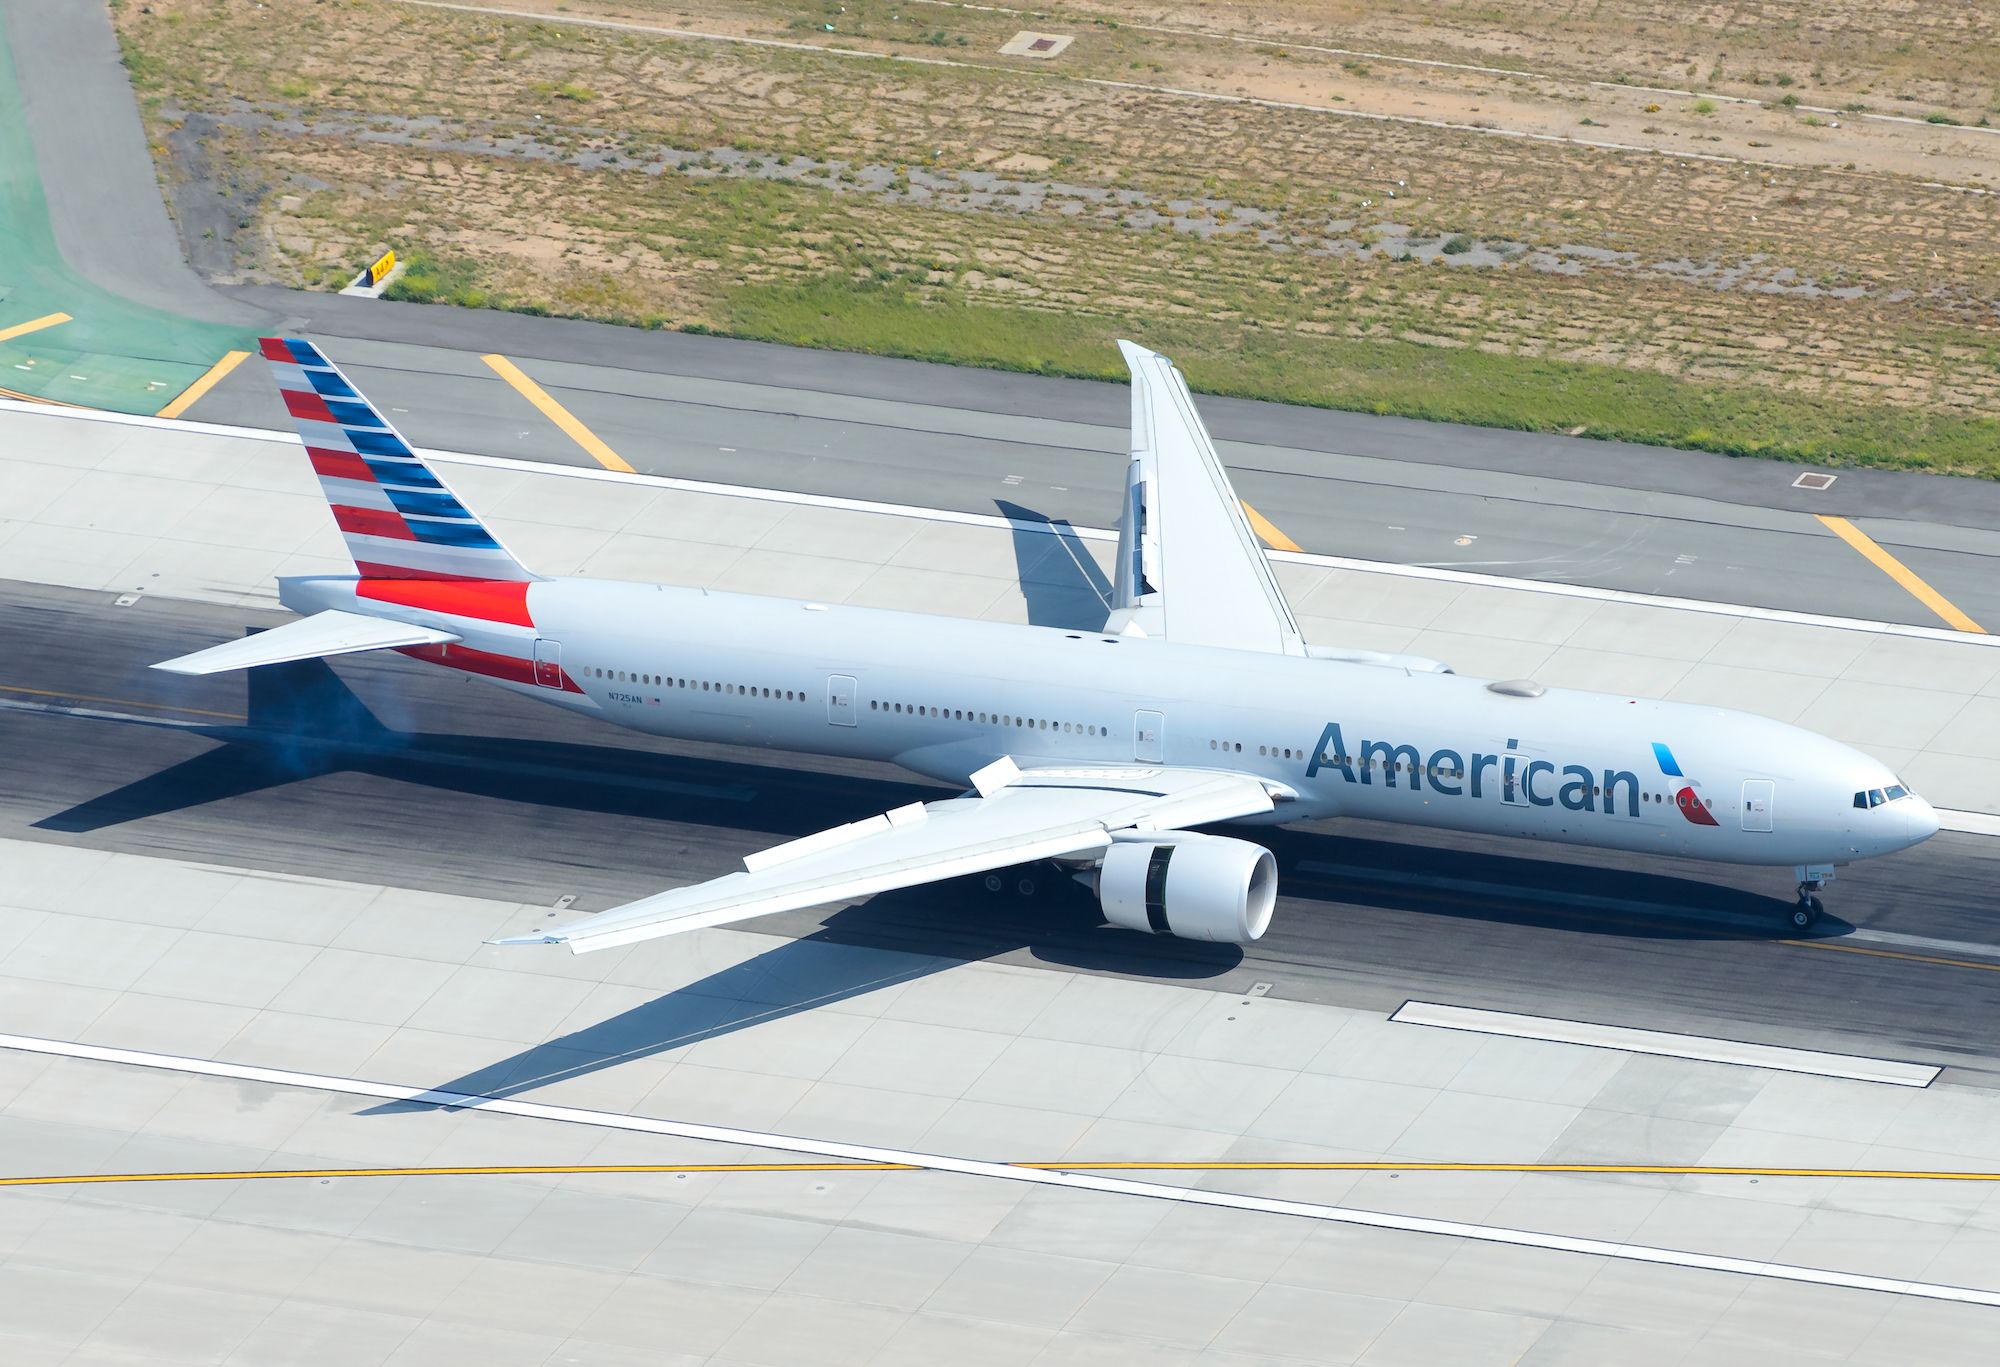 An American Airlines Boeing 777 on the runway at Los Angeles International Airport.